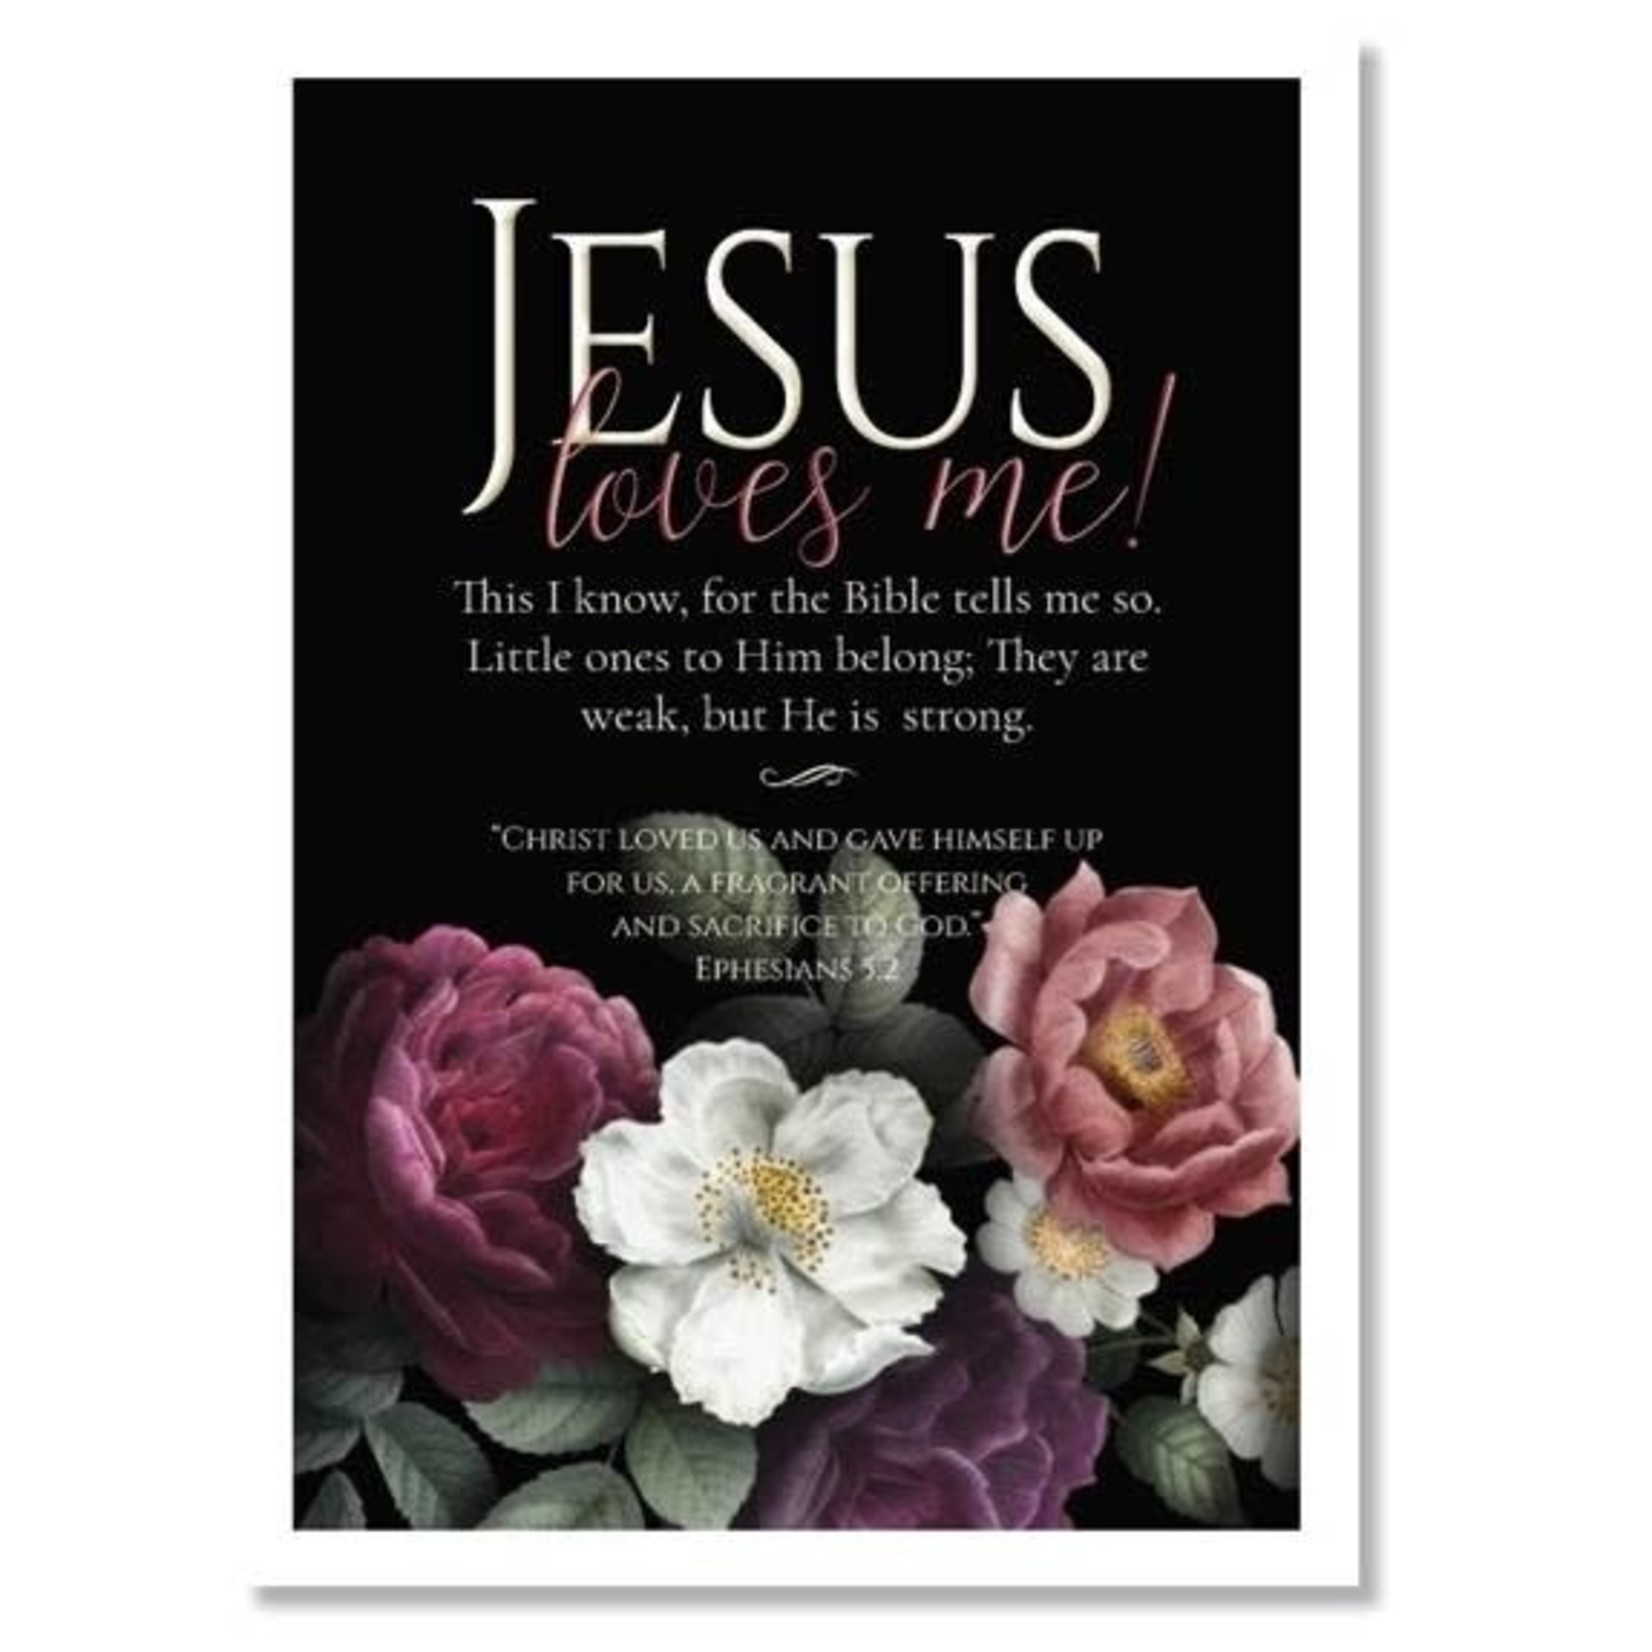 Hymns In My Heart - 5x7" Greeting Card - Baby (Newborn) - Jesus Loves Me!